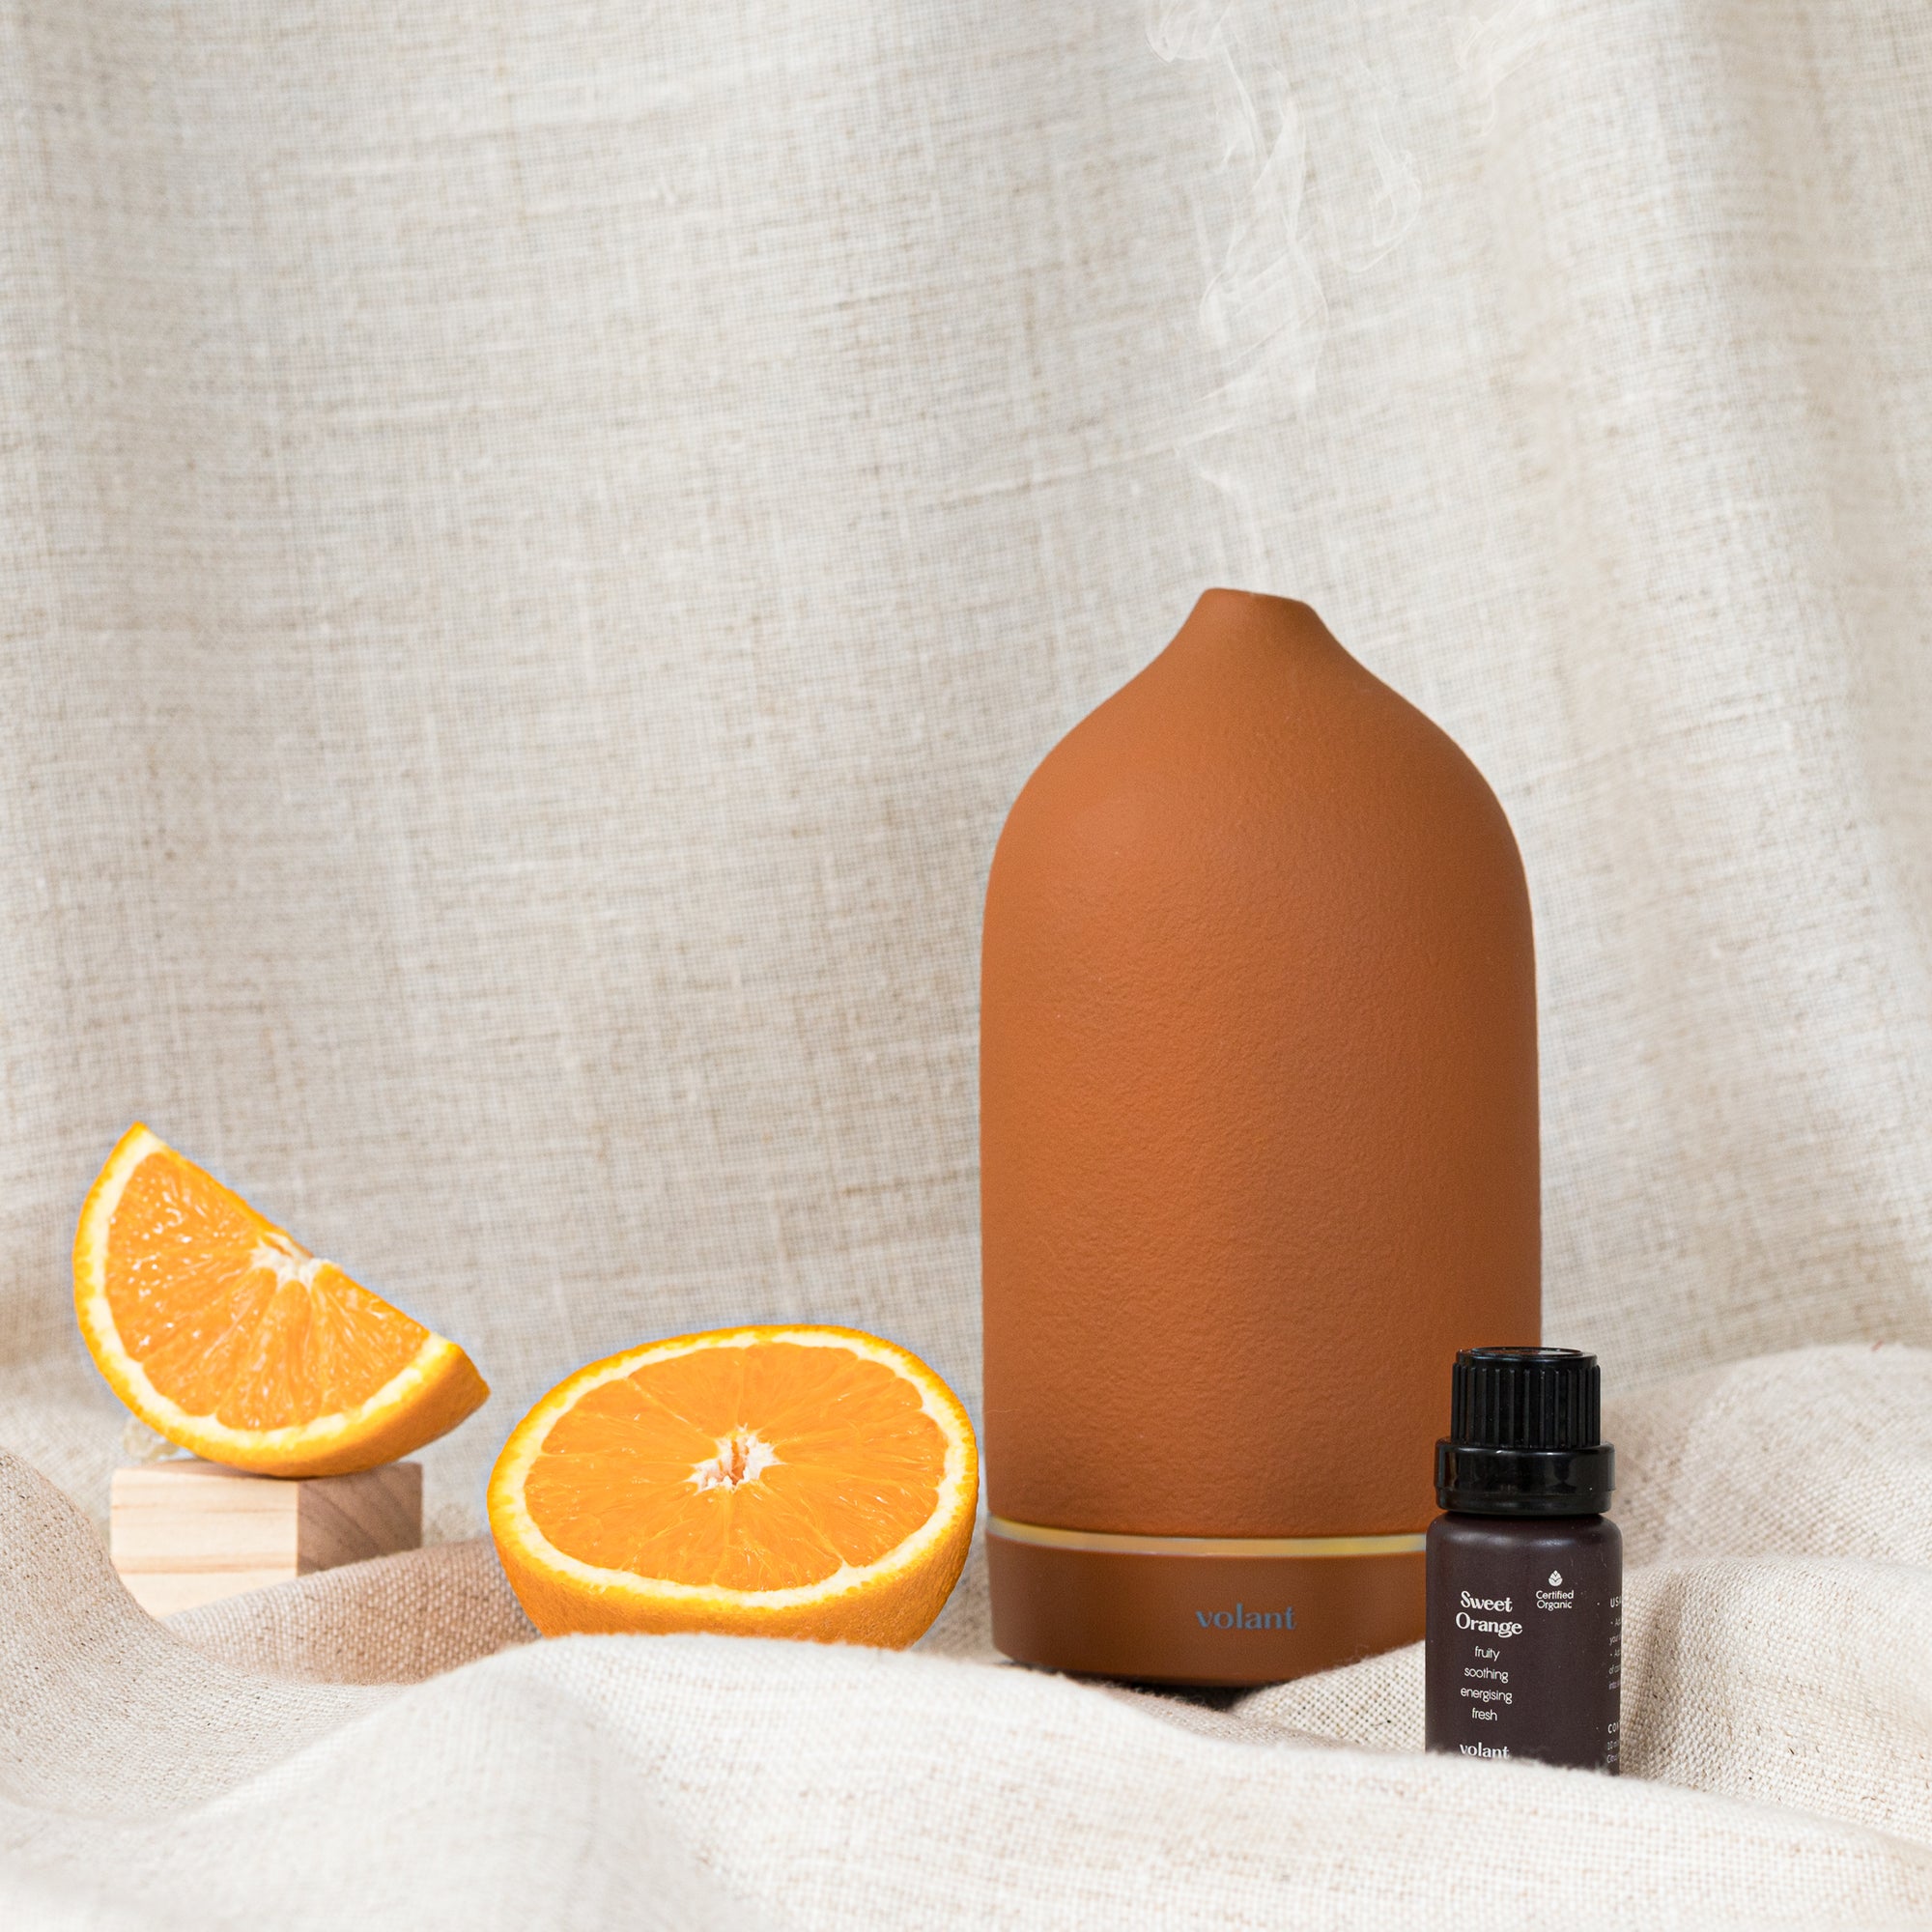 volant clay diffuser using organic sweet orange essential oil for fresh home scent